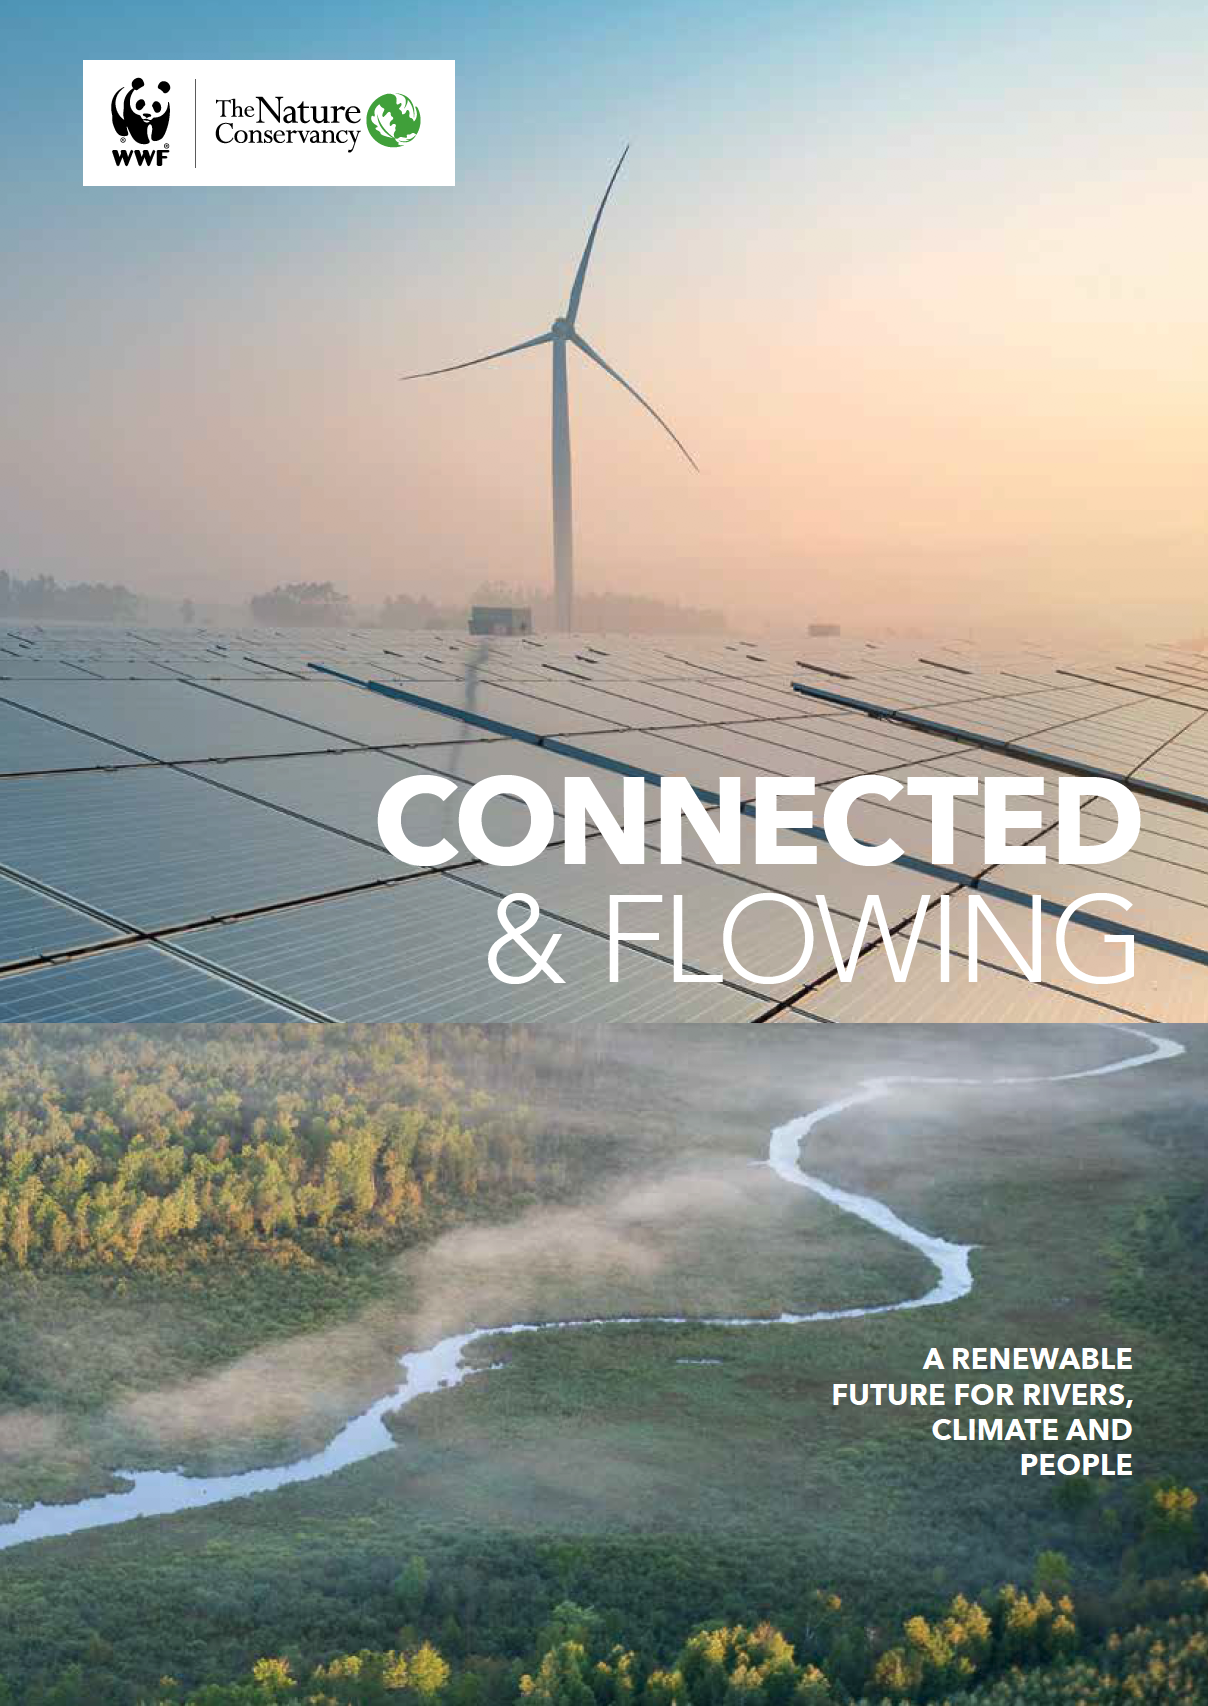 Thumbnail of Connected & Flowing report cover.